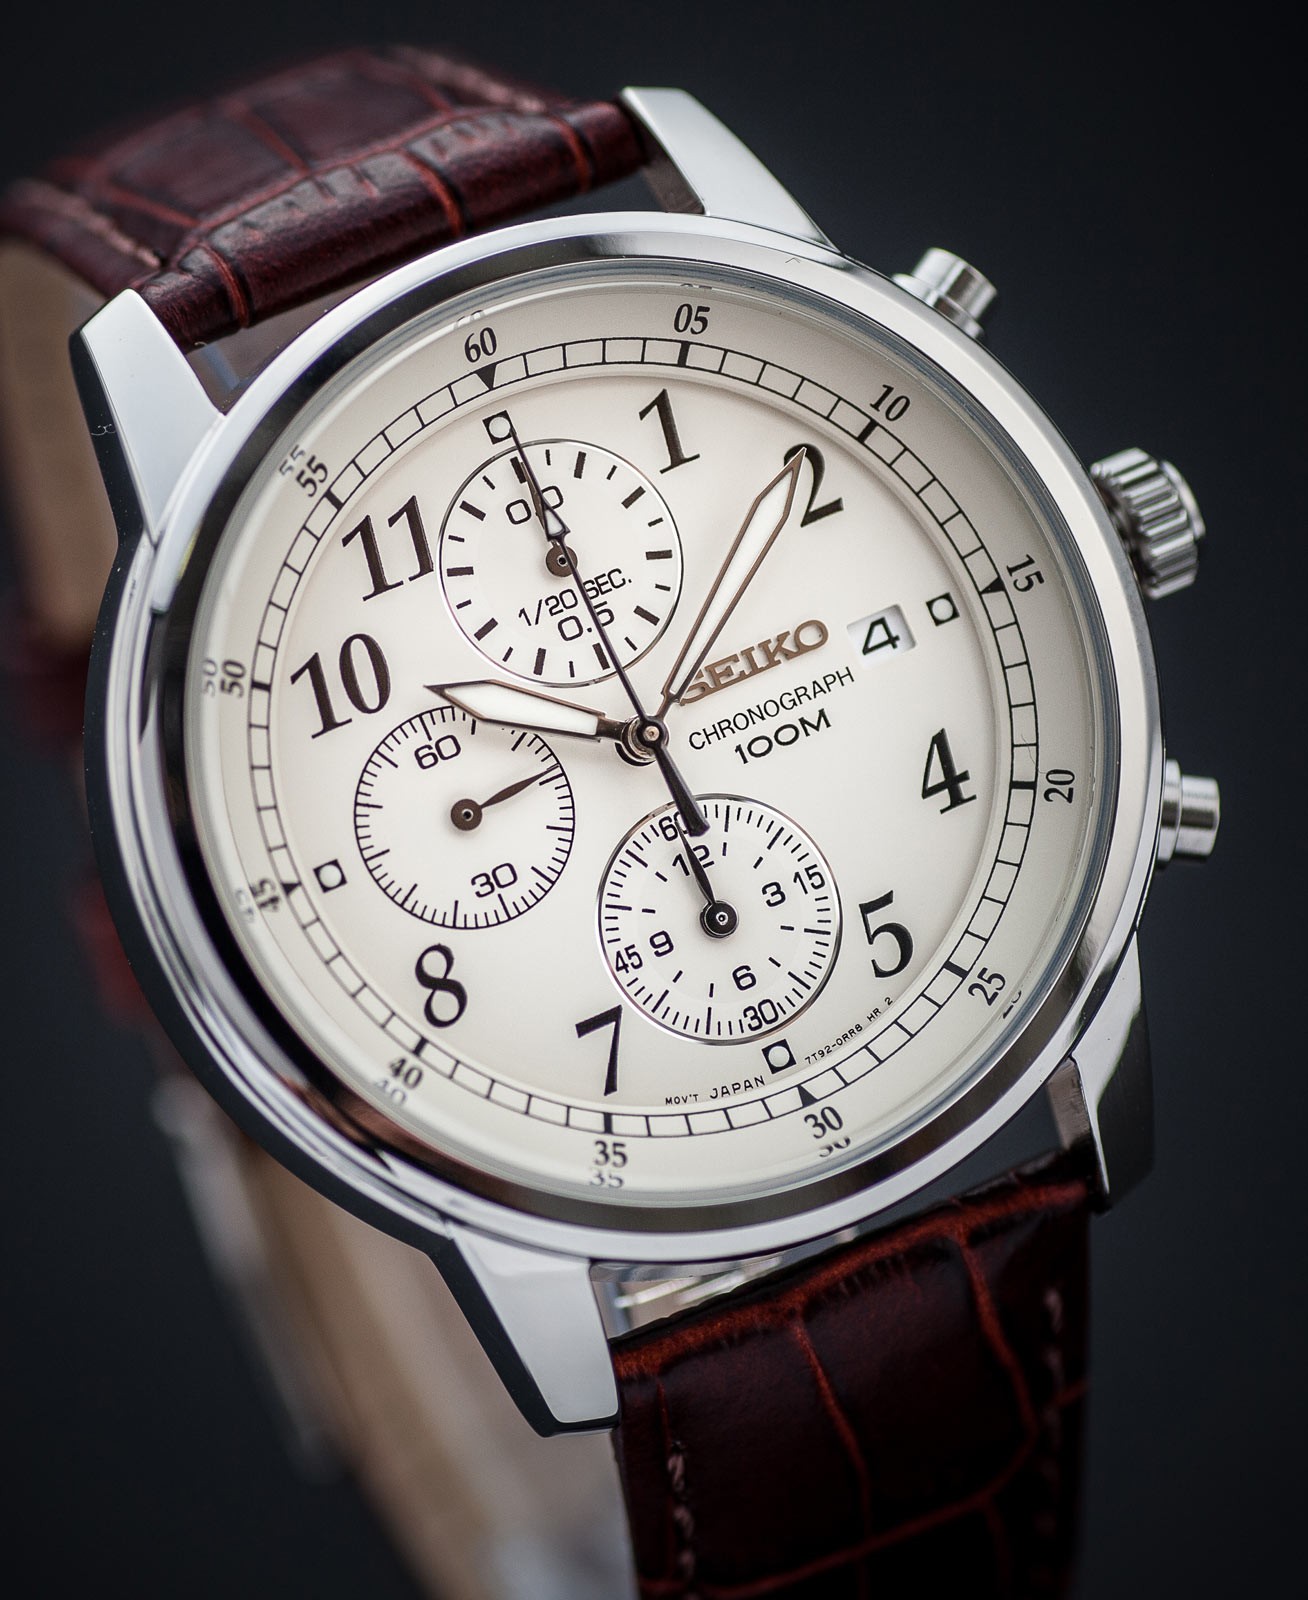 Seiko SNDC31 Review & Guide - Millenary Watches